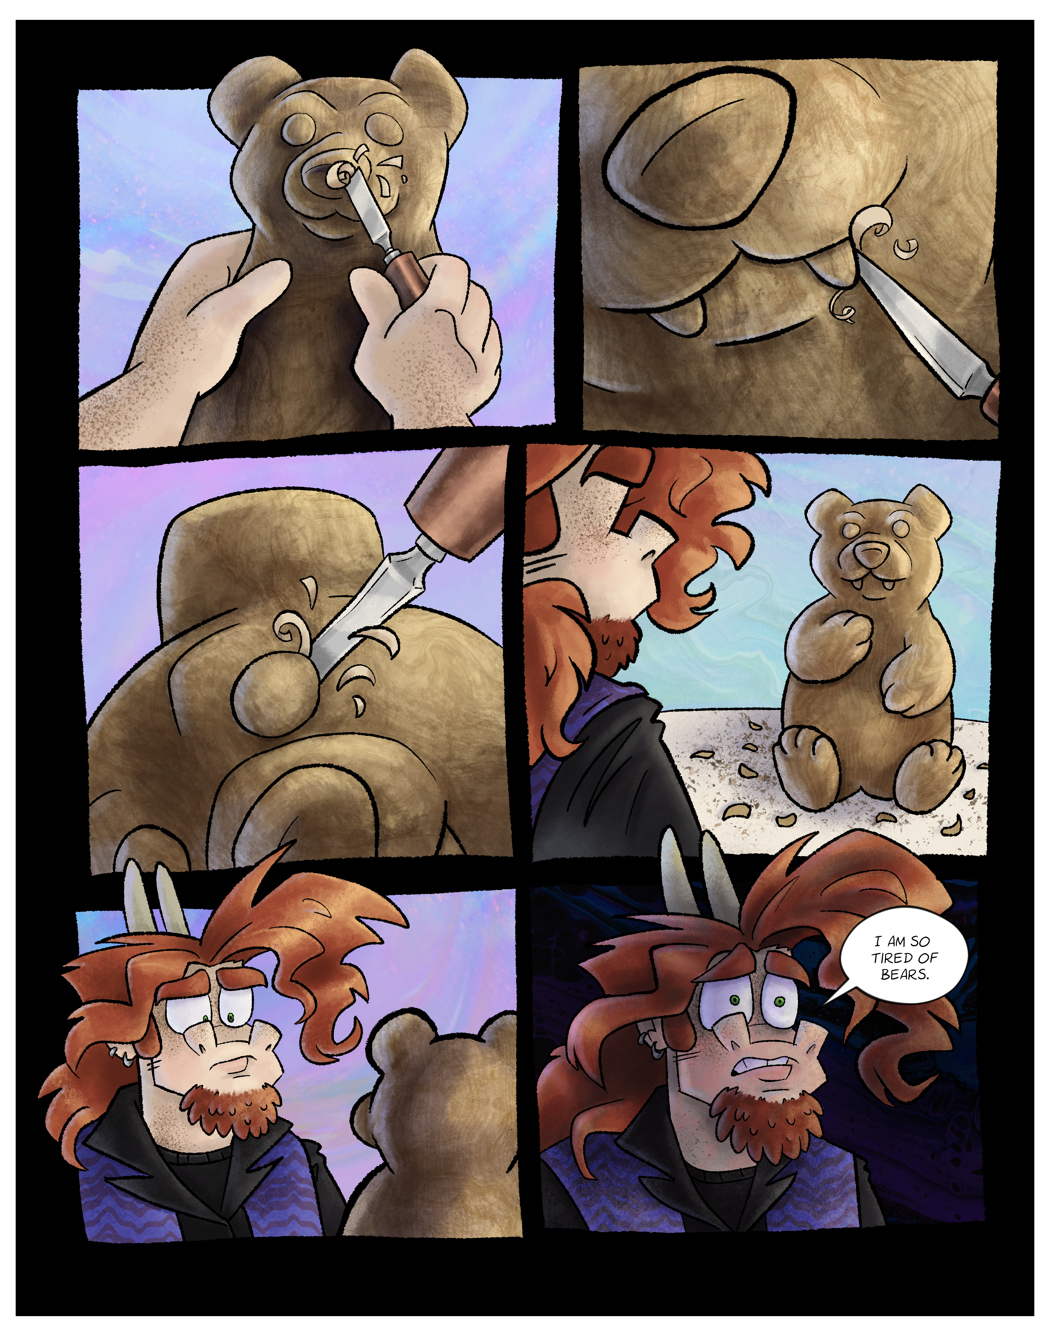 Chapter 3 Page 2: Trouble in Paradise